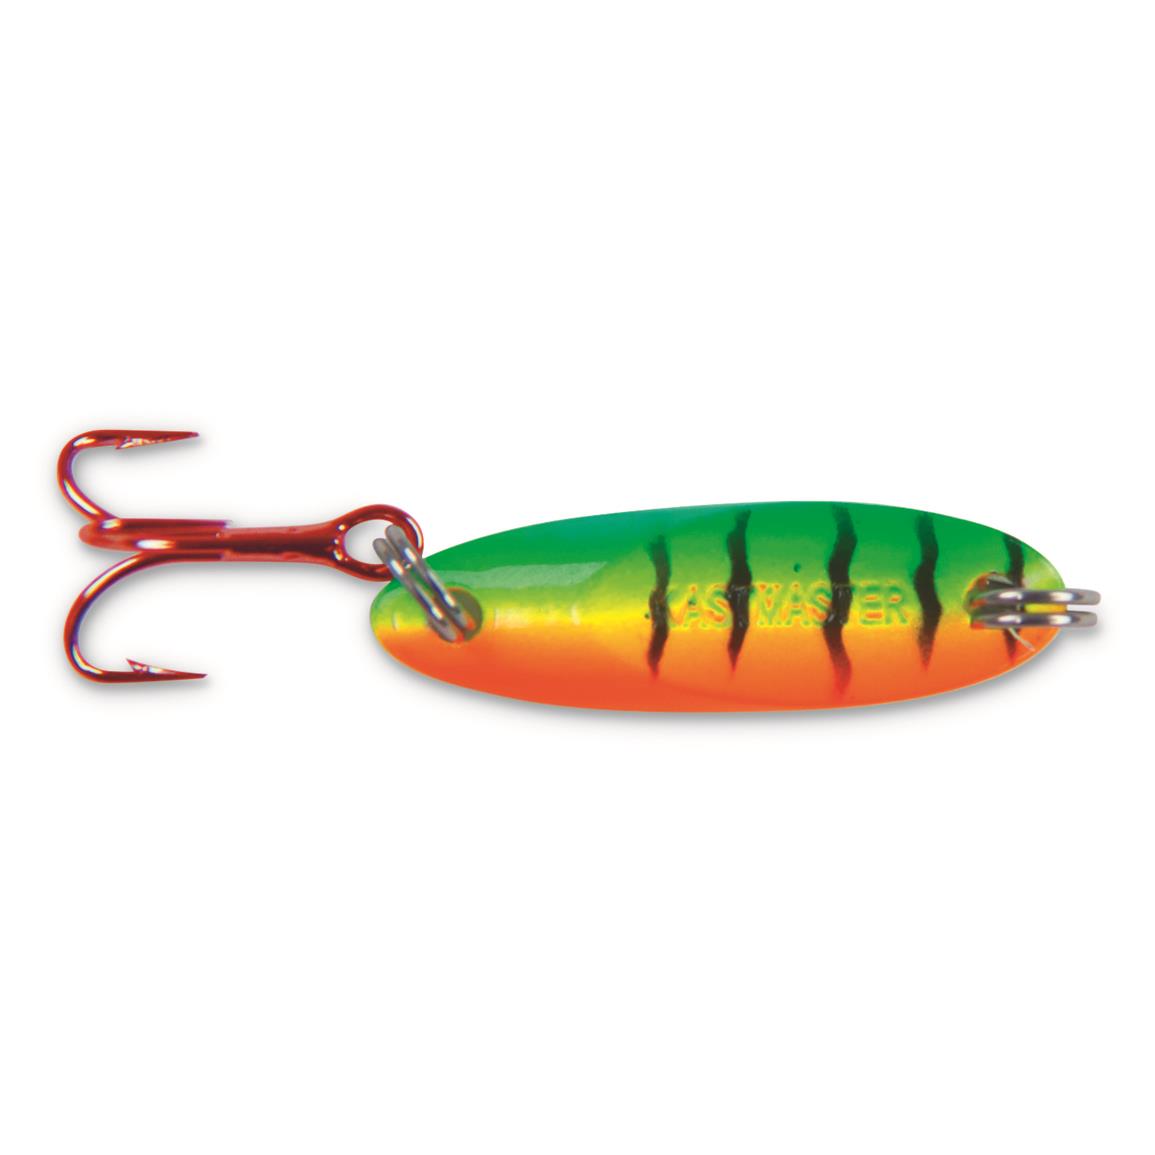 Eurotackle FNM Minnow 1.5, 9 Pack - 738212, Ice Tackle at